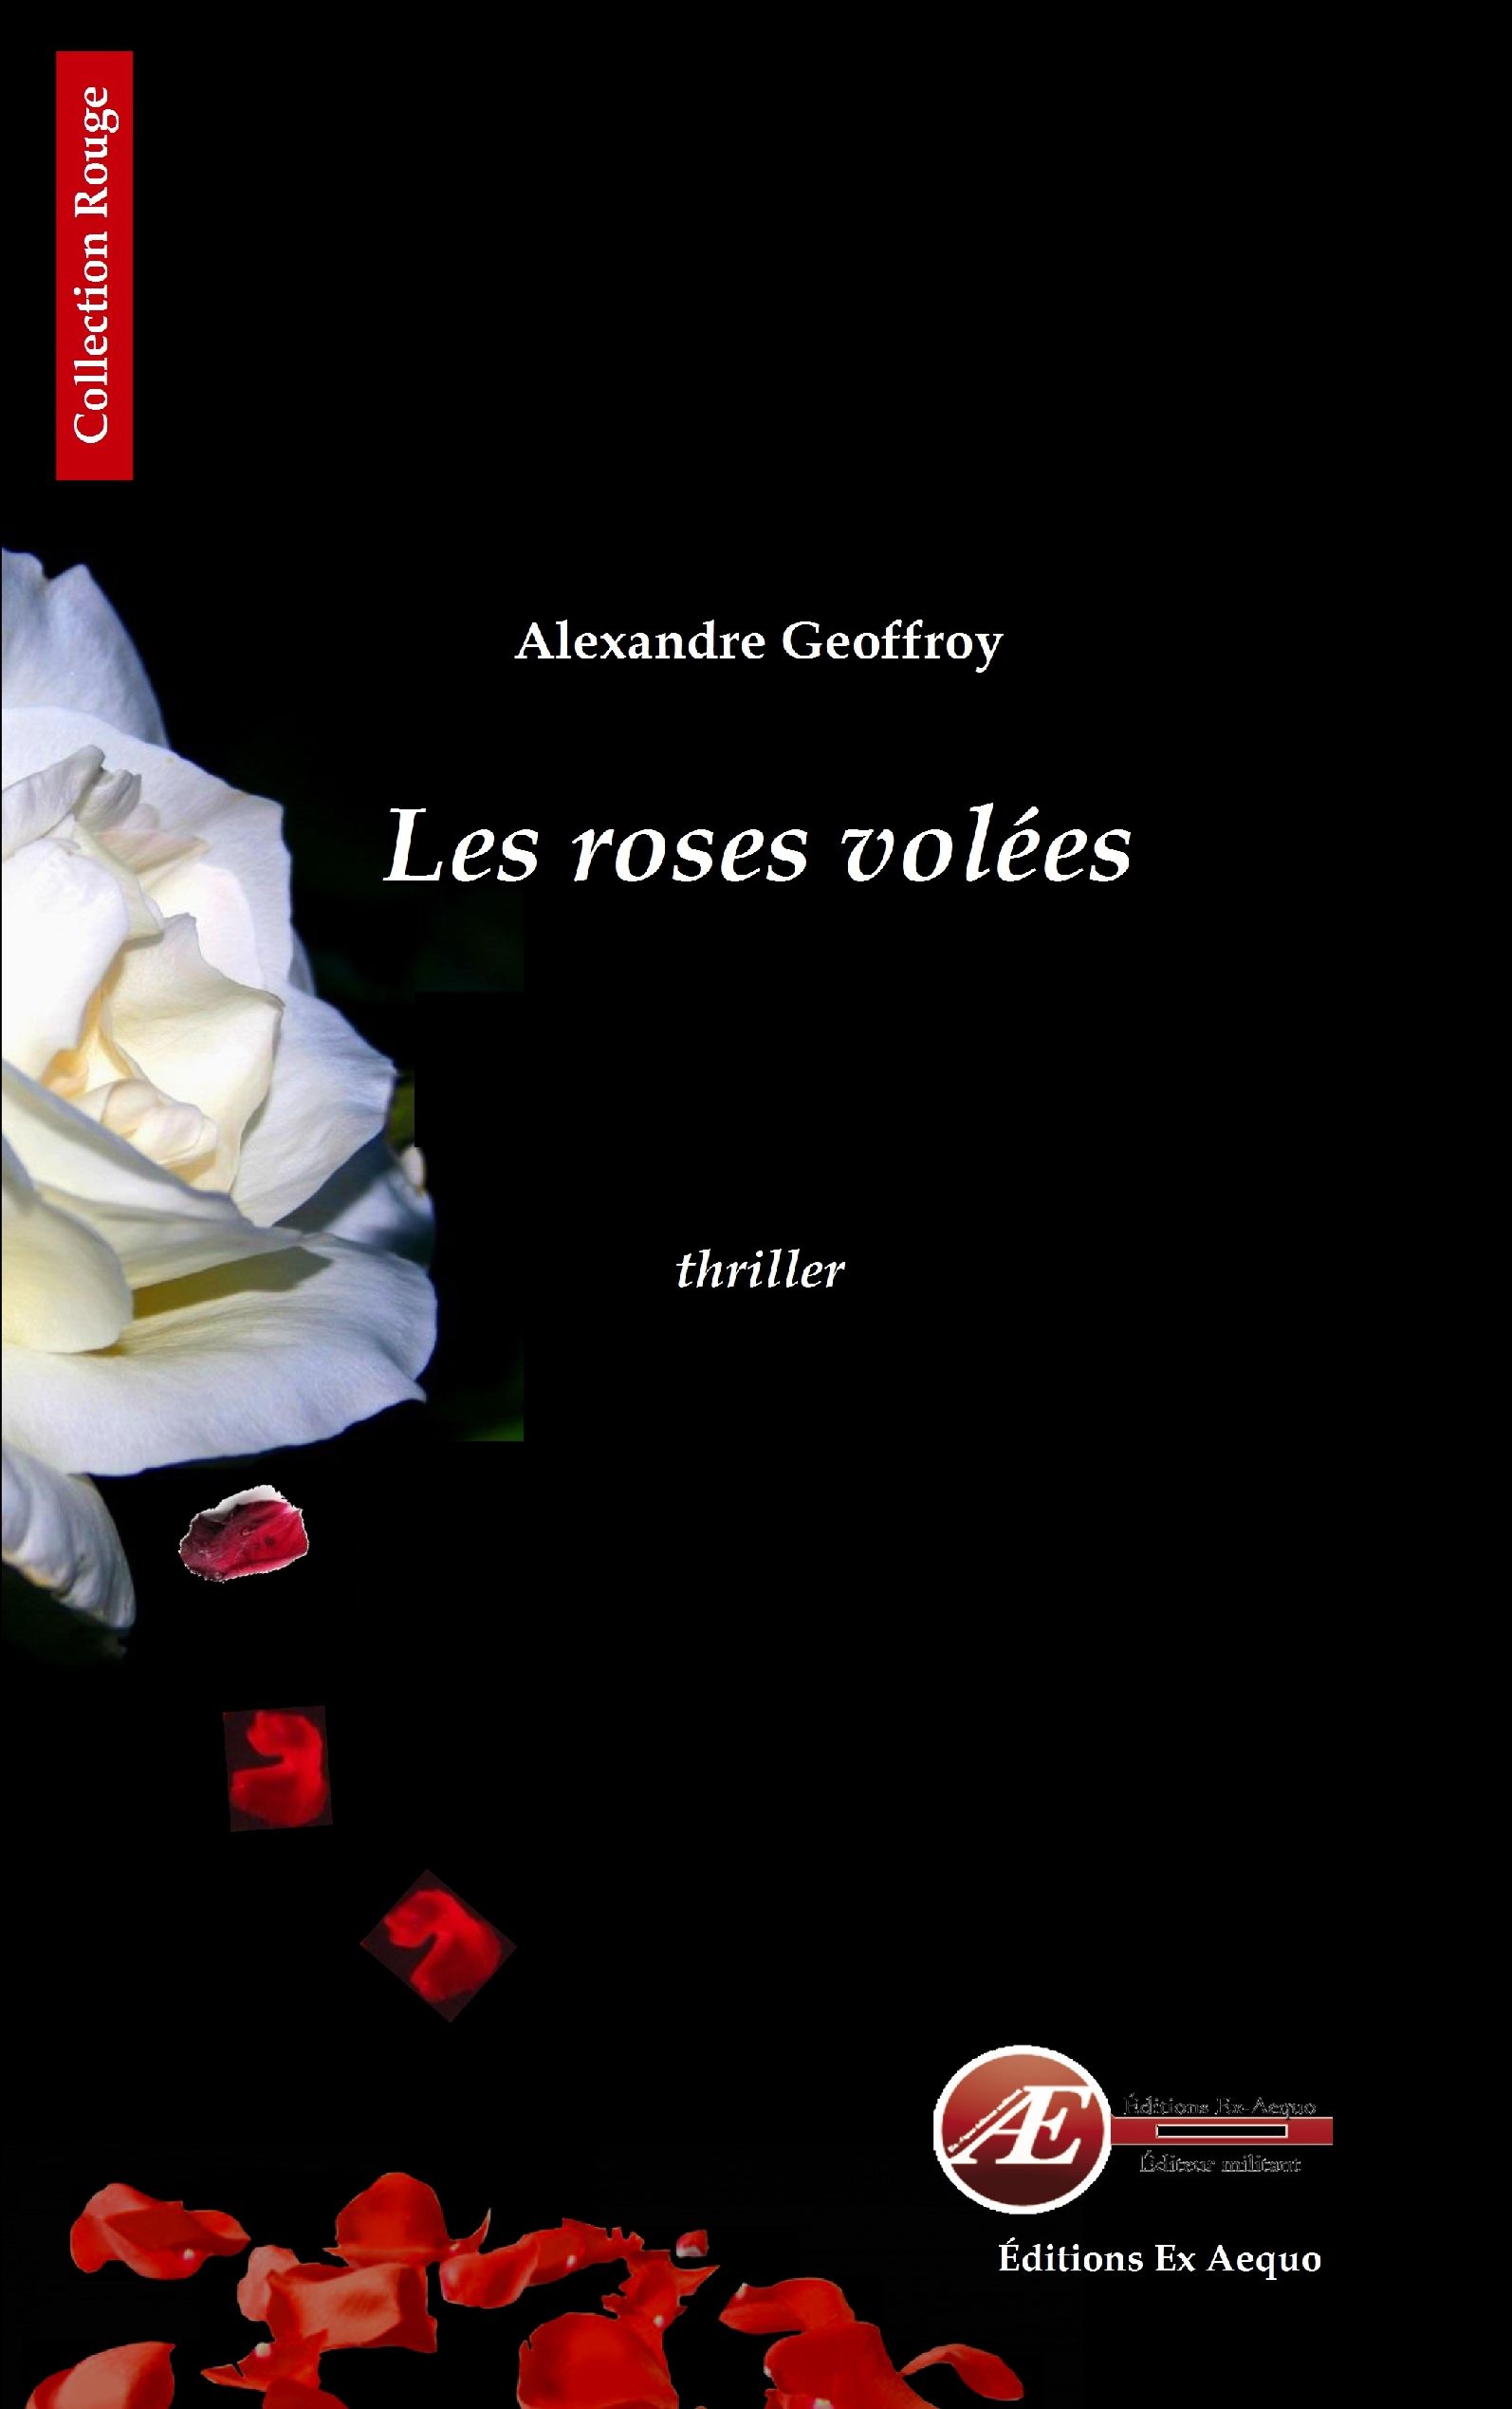 You are currently viewing Les roses volées, d’Alexandre Geoffroy